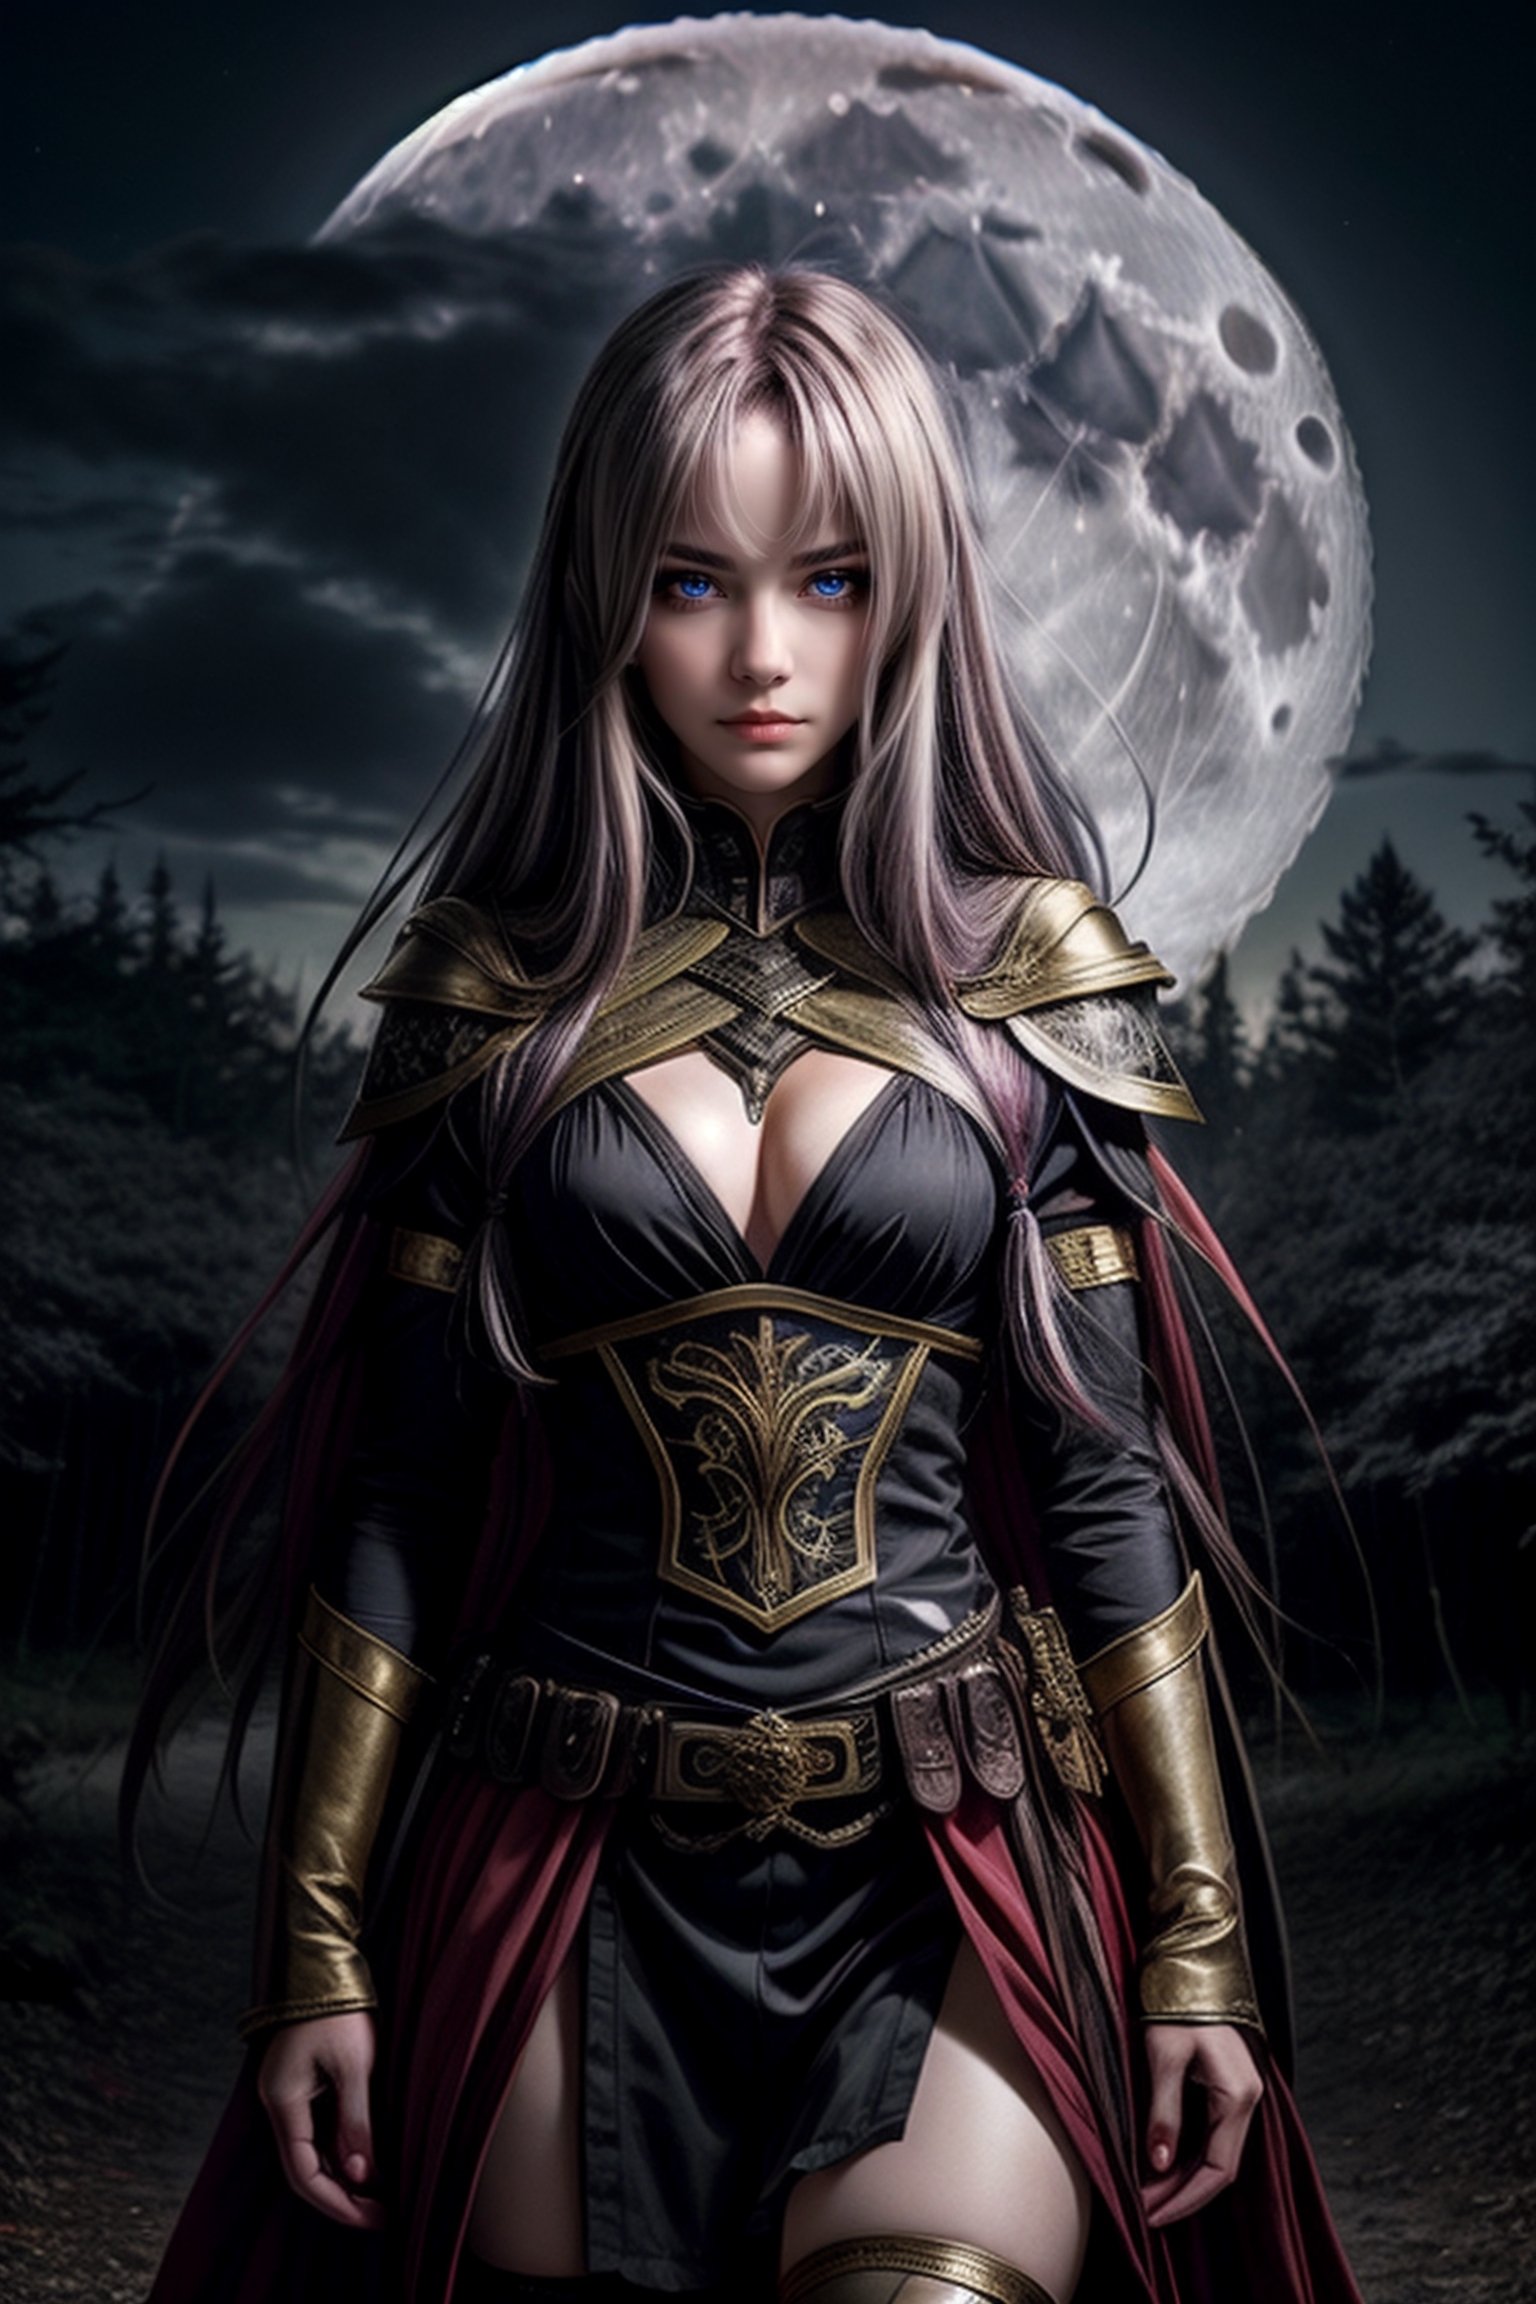 An intense anime girl with bronze-colored hair and black eyes, in a dark warrior's costume. She stands in an enchanted forest, the full moon lighting up her determined eyes.

